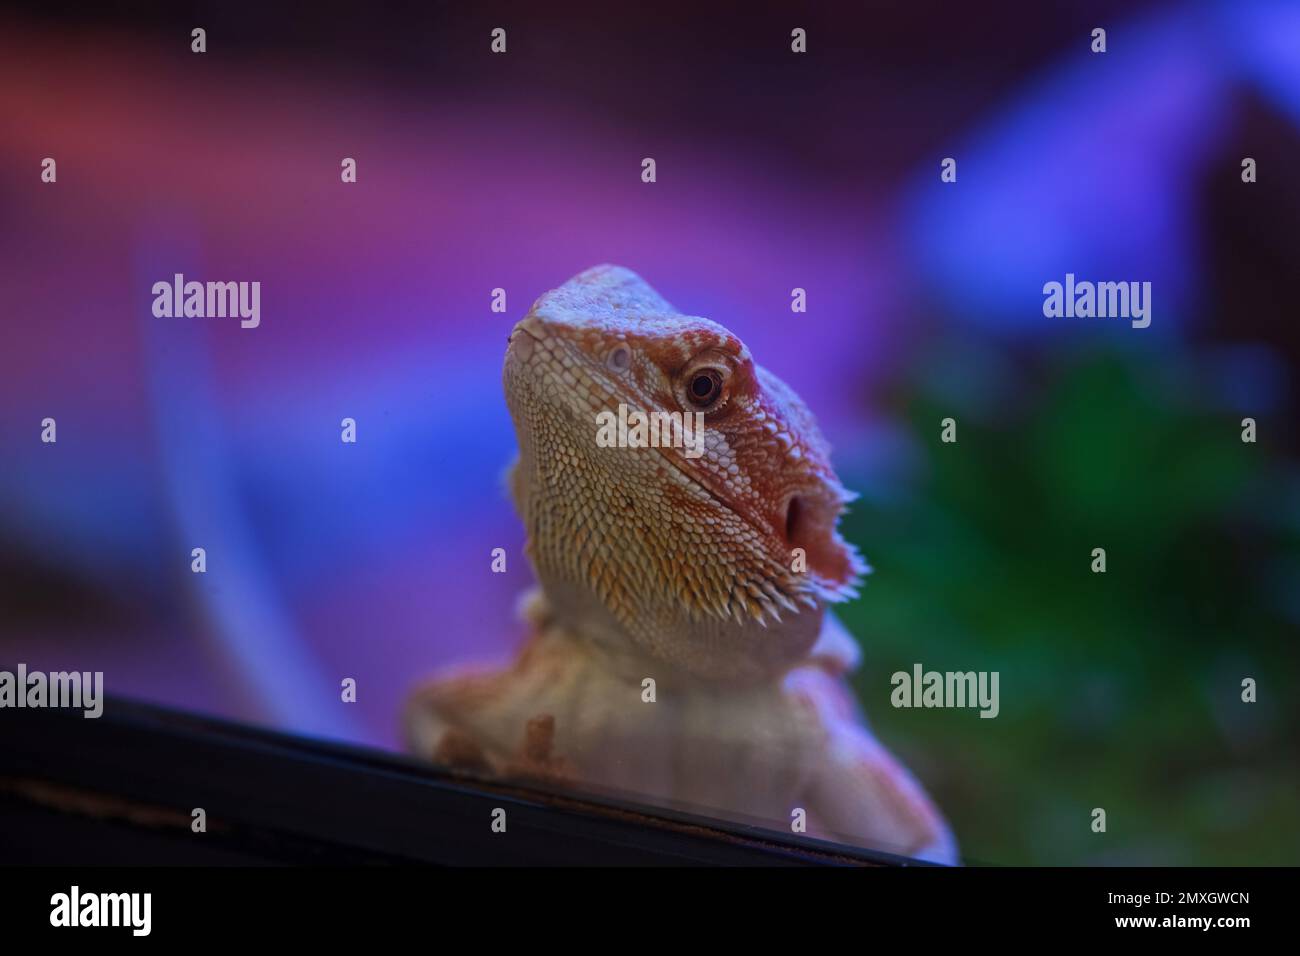 Lizard in a colorful terrarium with beautiful lighting Stock Photo